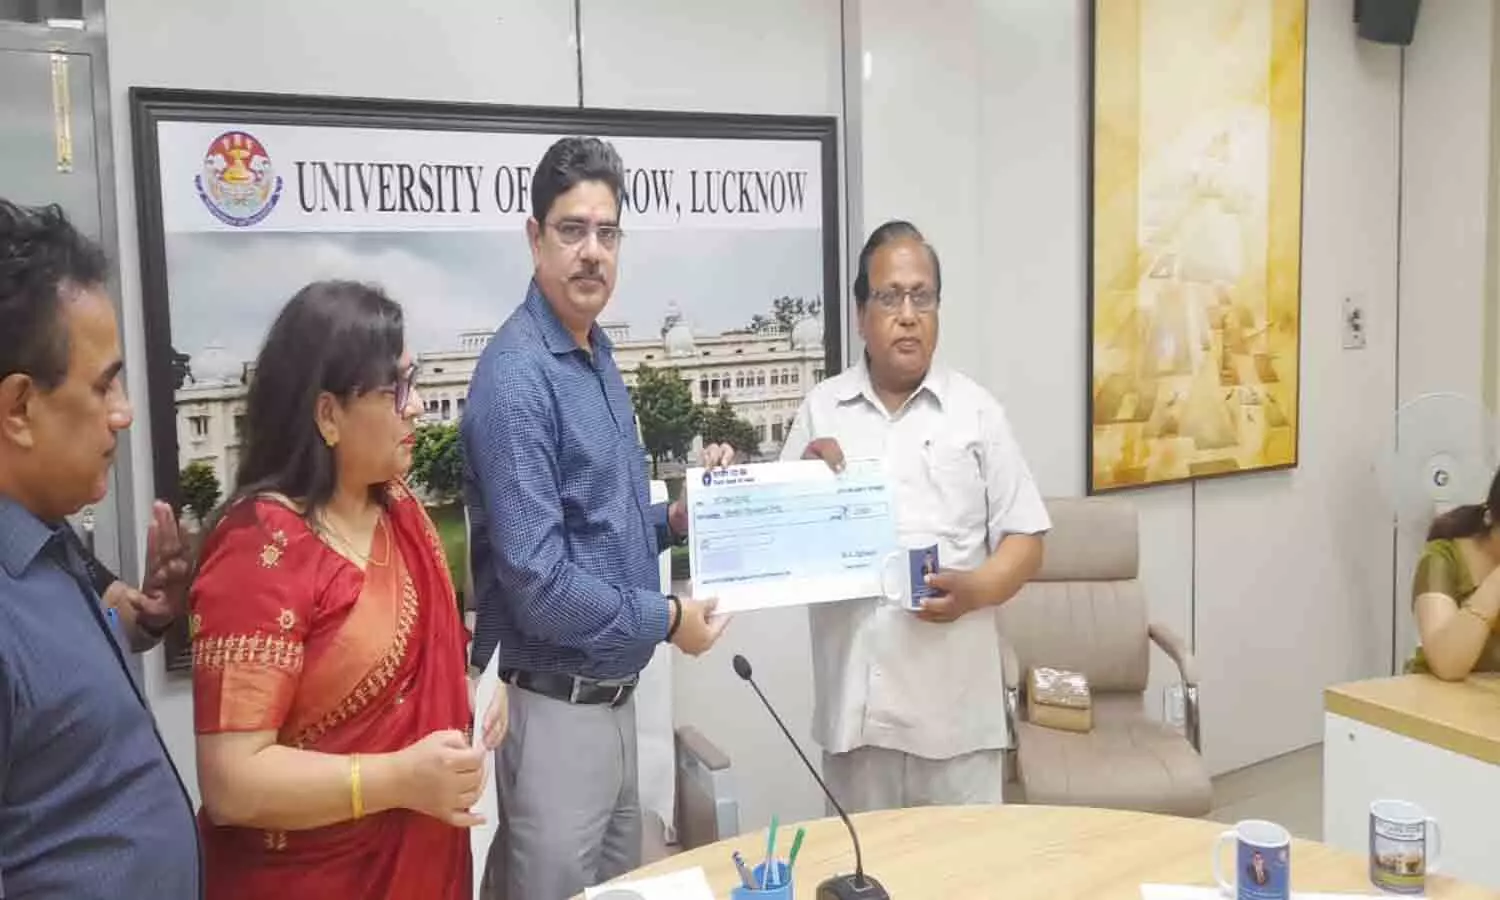 Lucknow University: Vice Chancellor launched VC Care Fund, deposited Rs 3 lakh 83 thousand on the first day